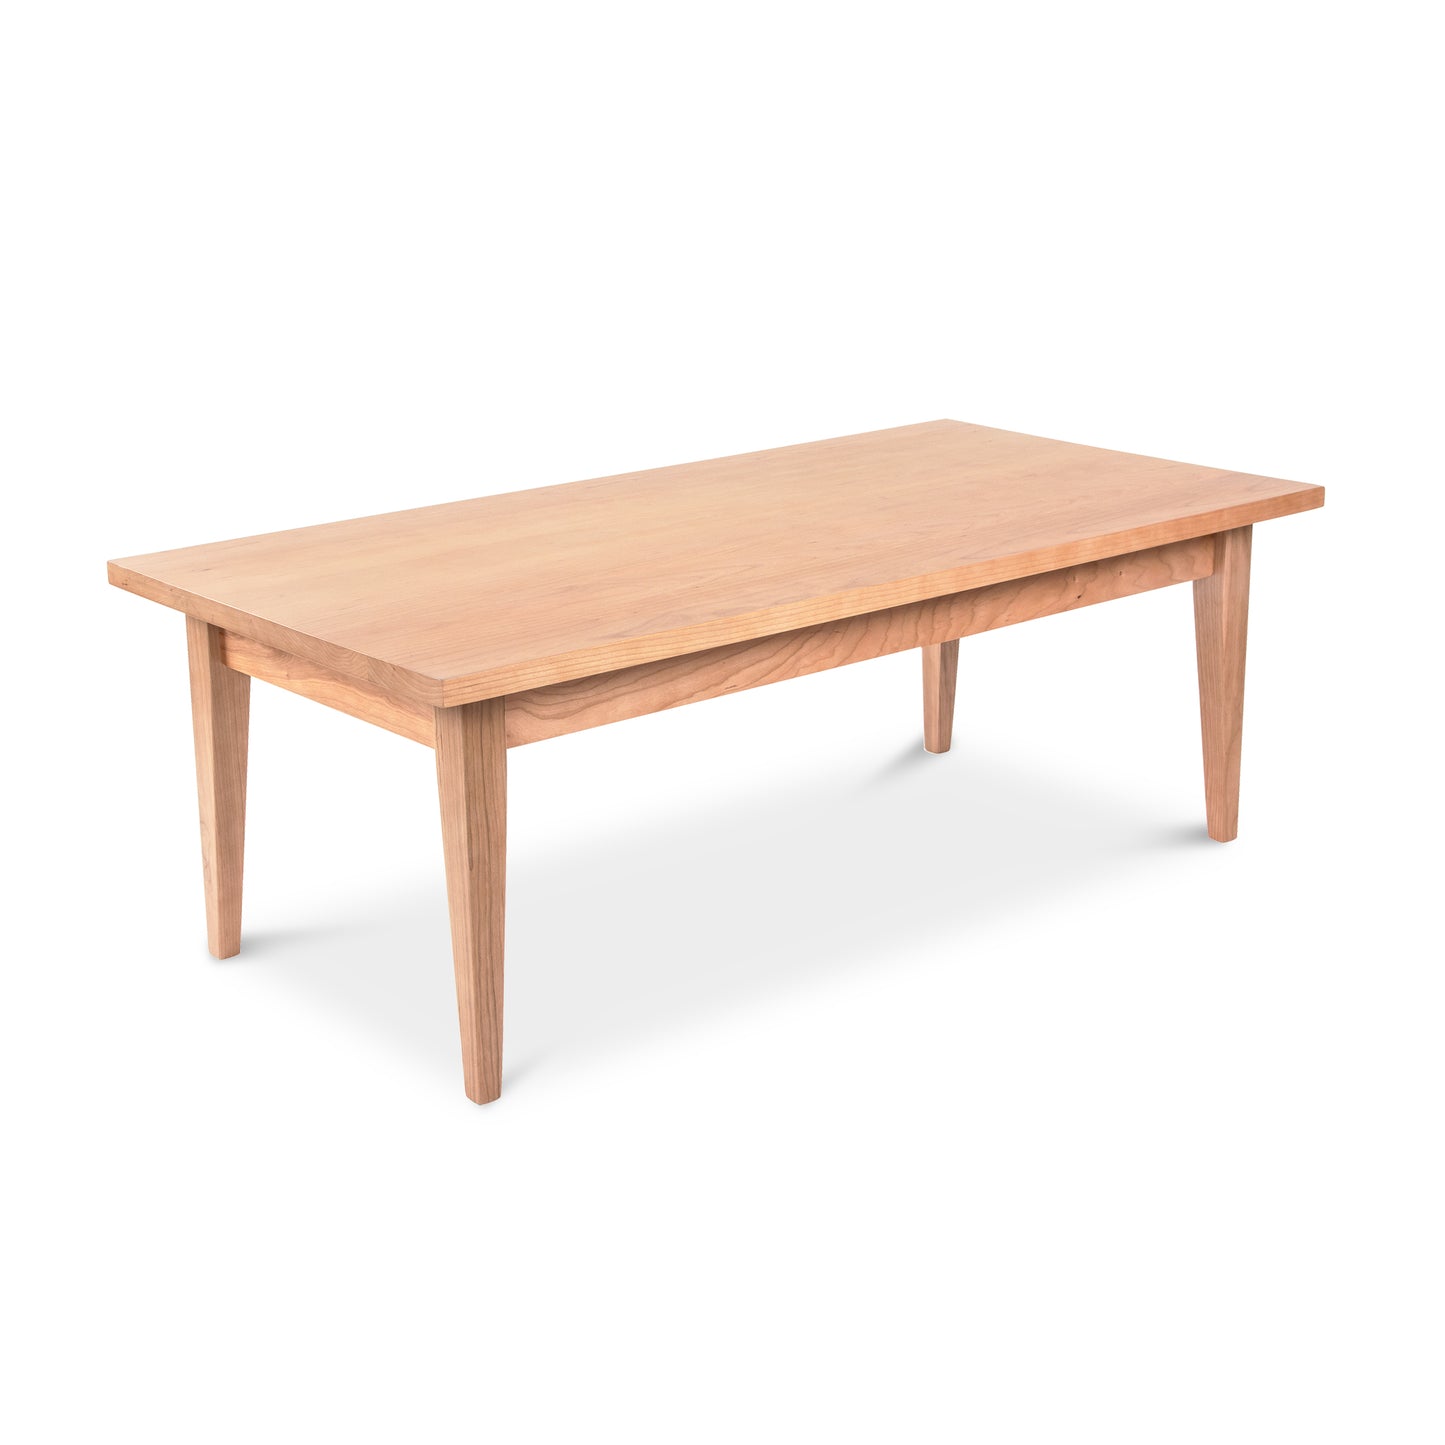 A Lyndon Furniture Classic Shaker Coffee Table with functionality, on a white background.